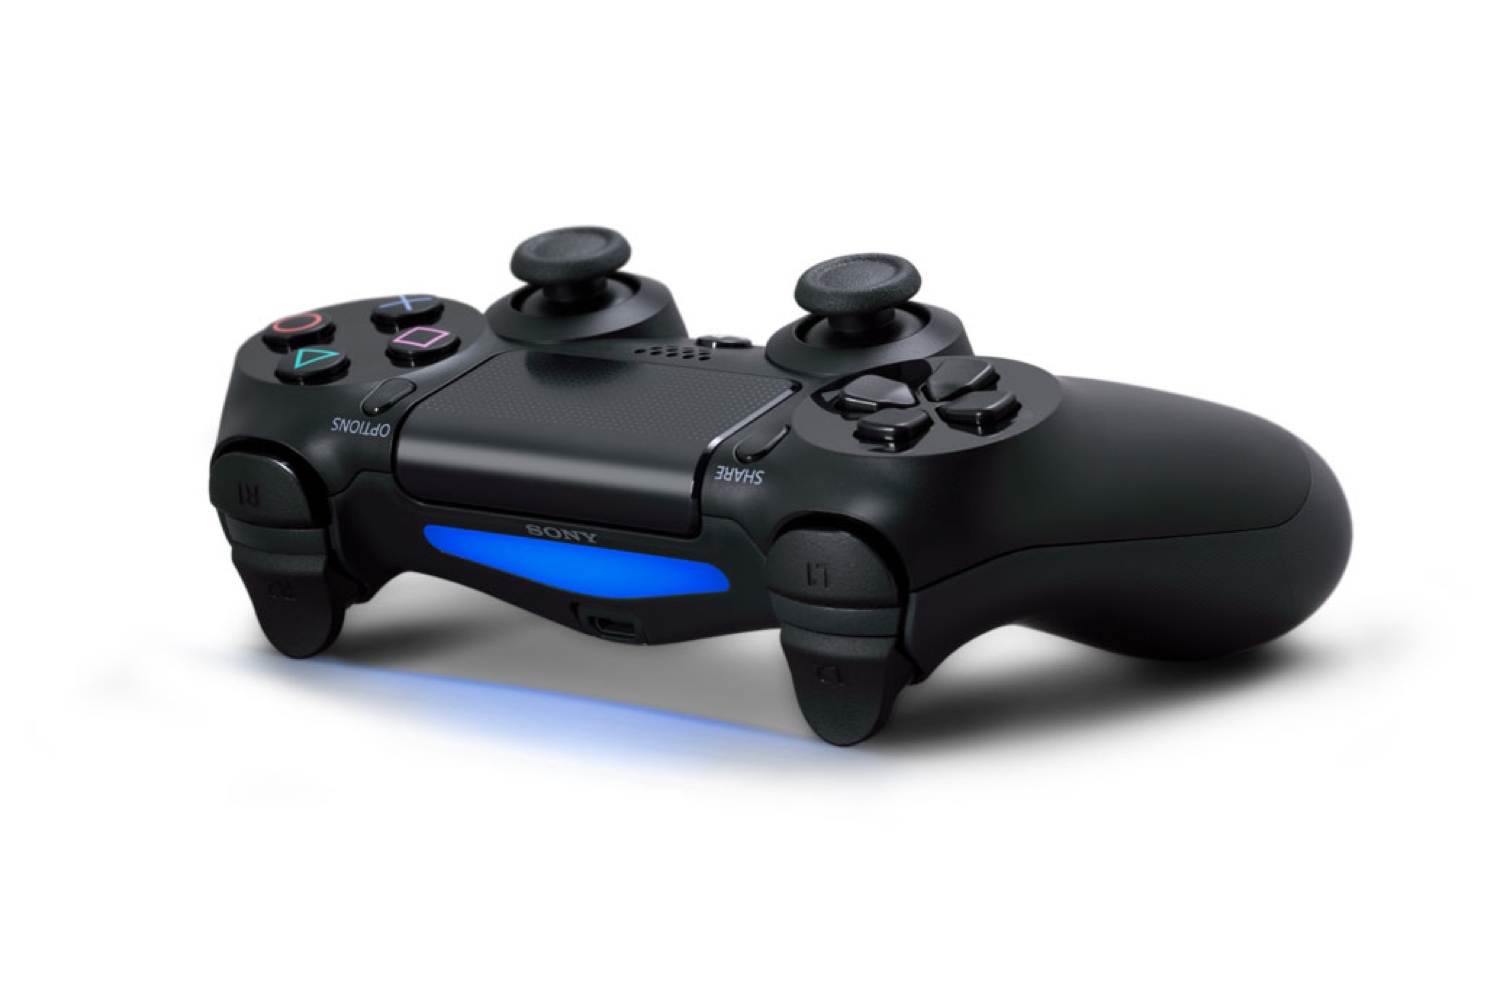 The PS4 DualShock 4 GamePad Is Compatible with the PS3 |